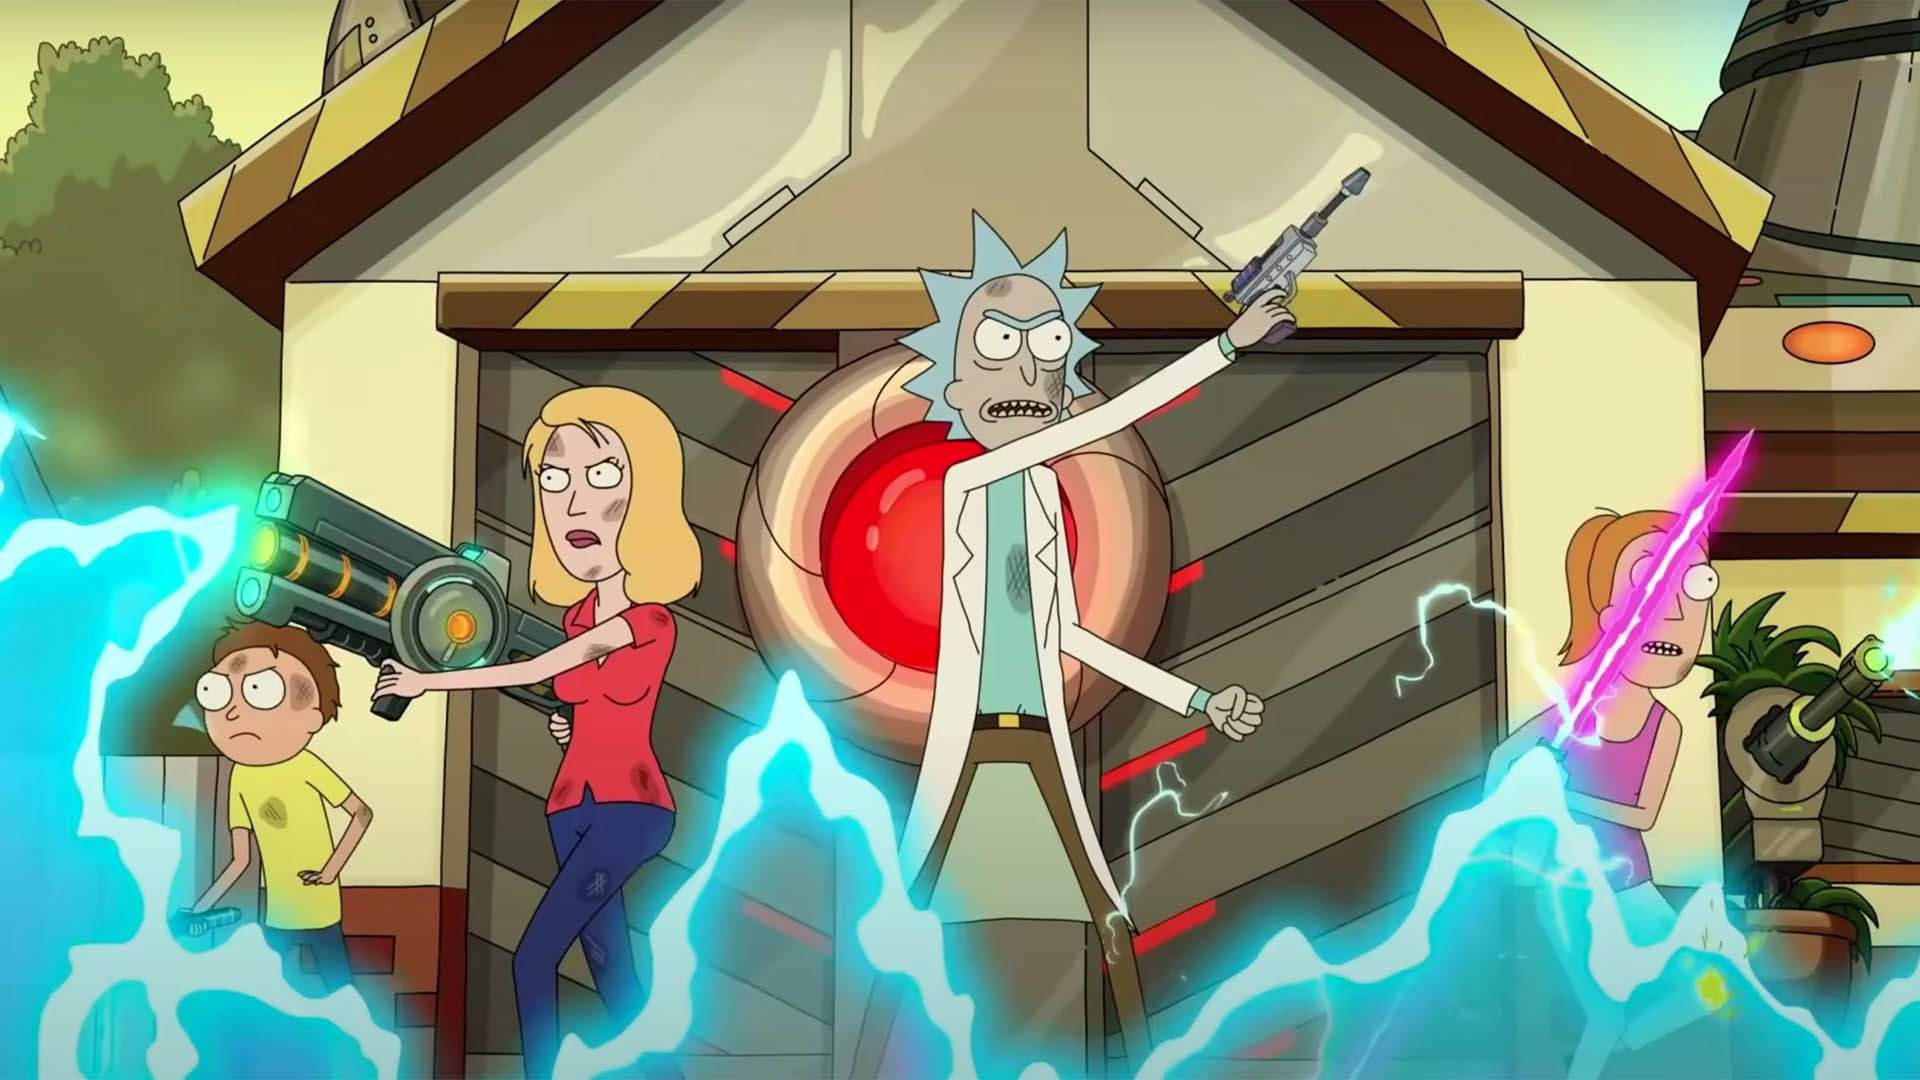 The New 'Rick and Morty' Season Five Trailer Teases Battles, Parodies and Plenty of Sci-Fi Chaos